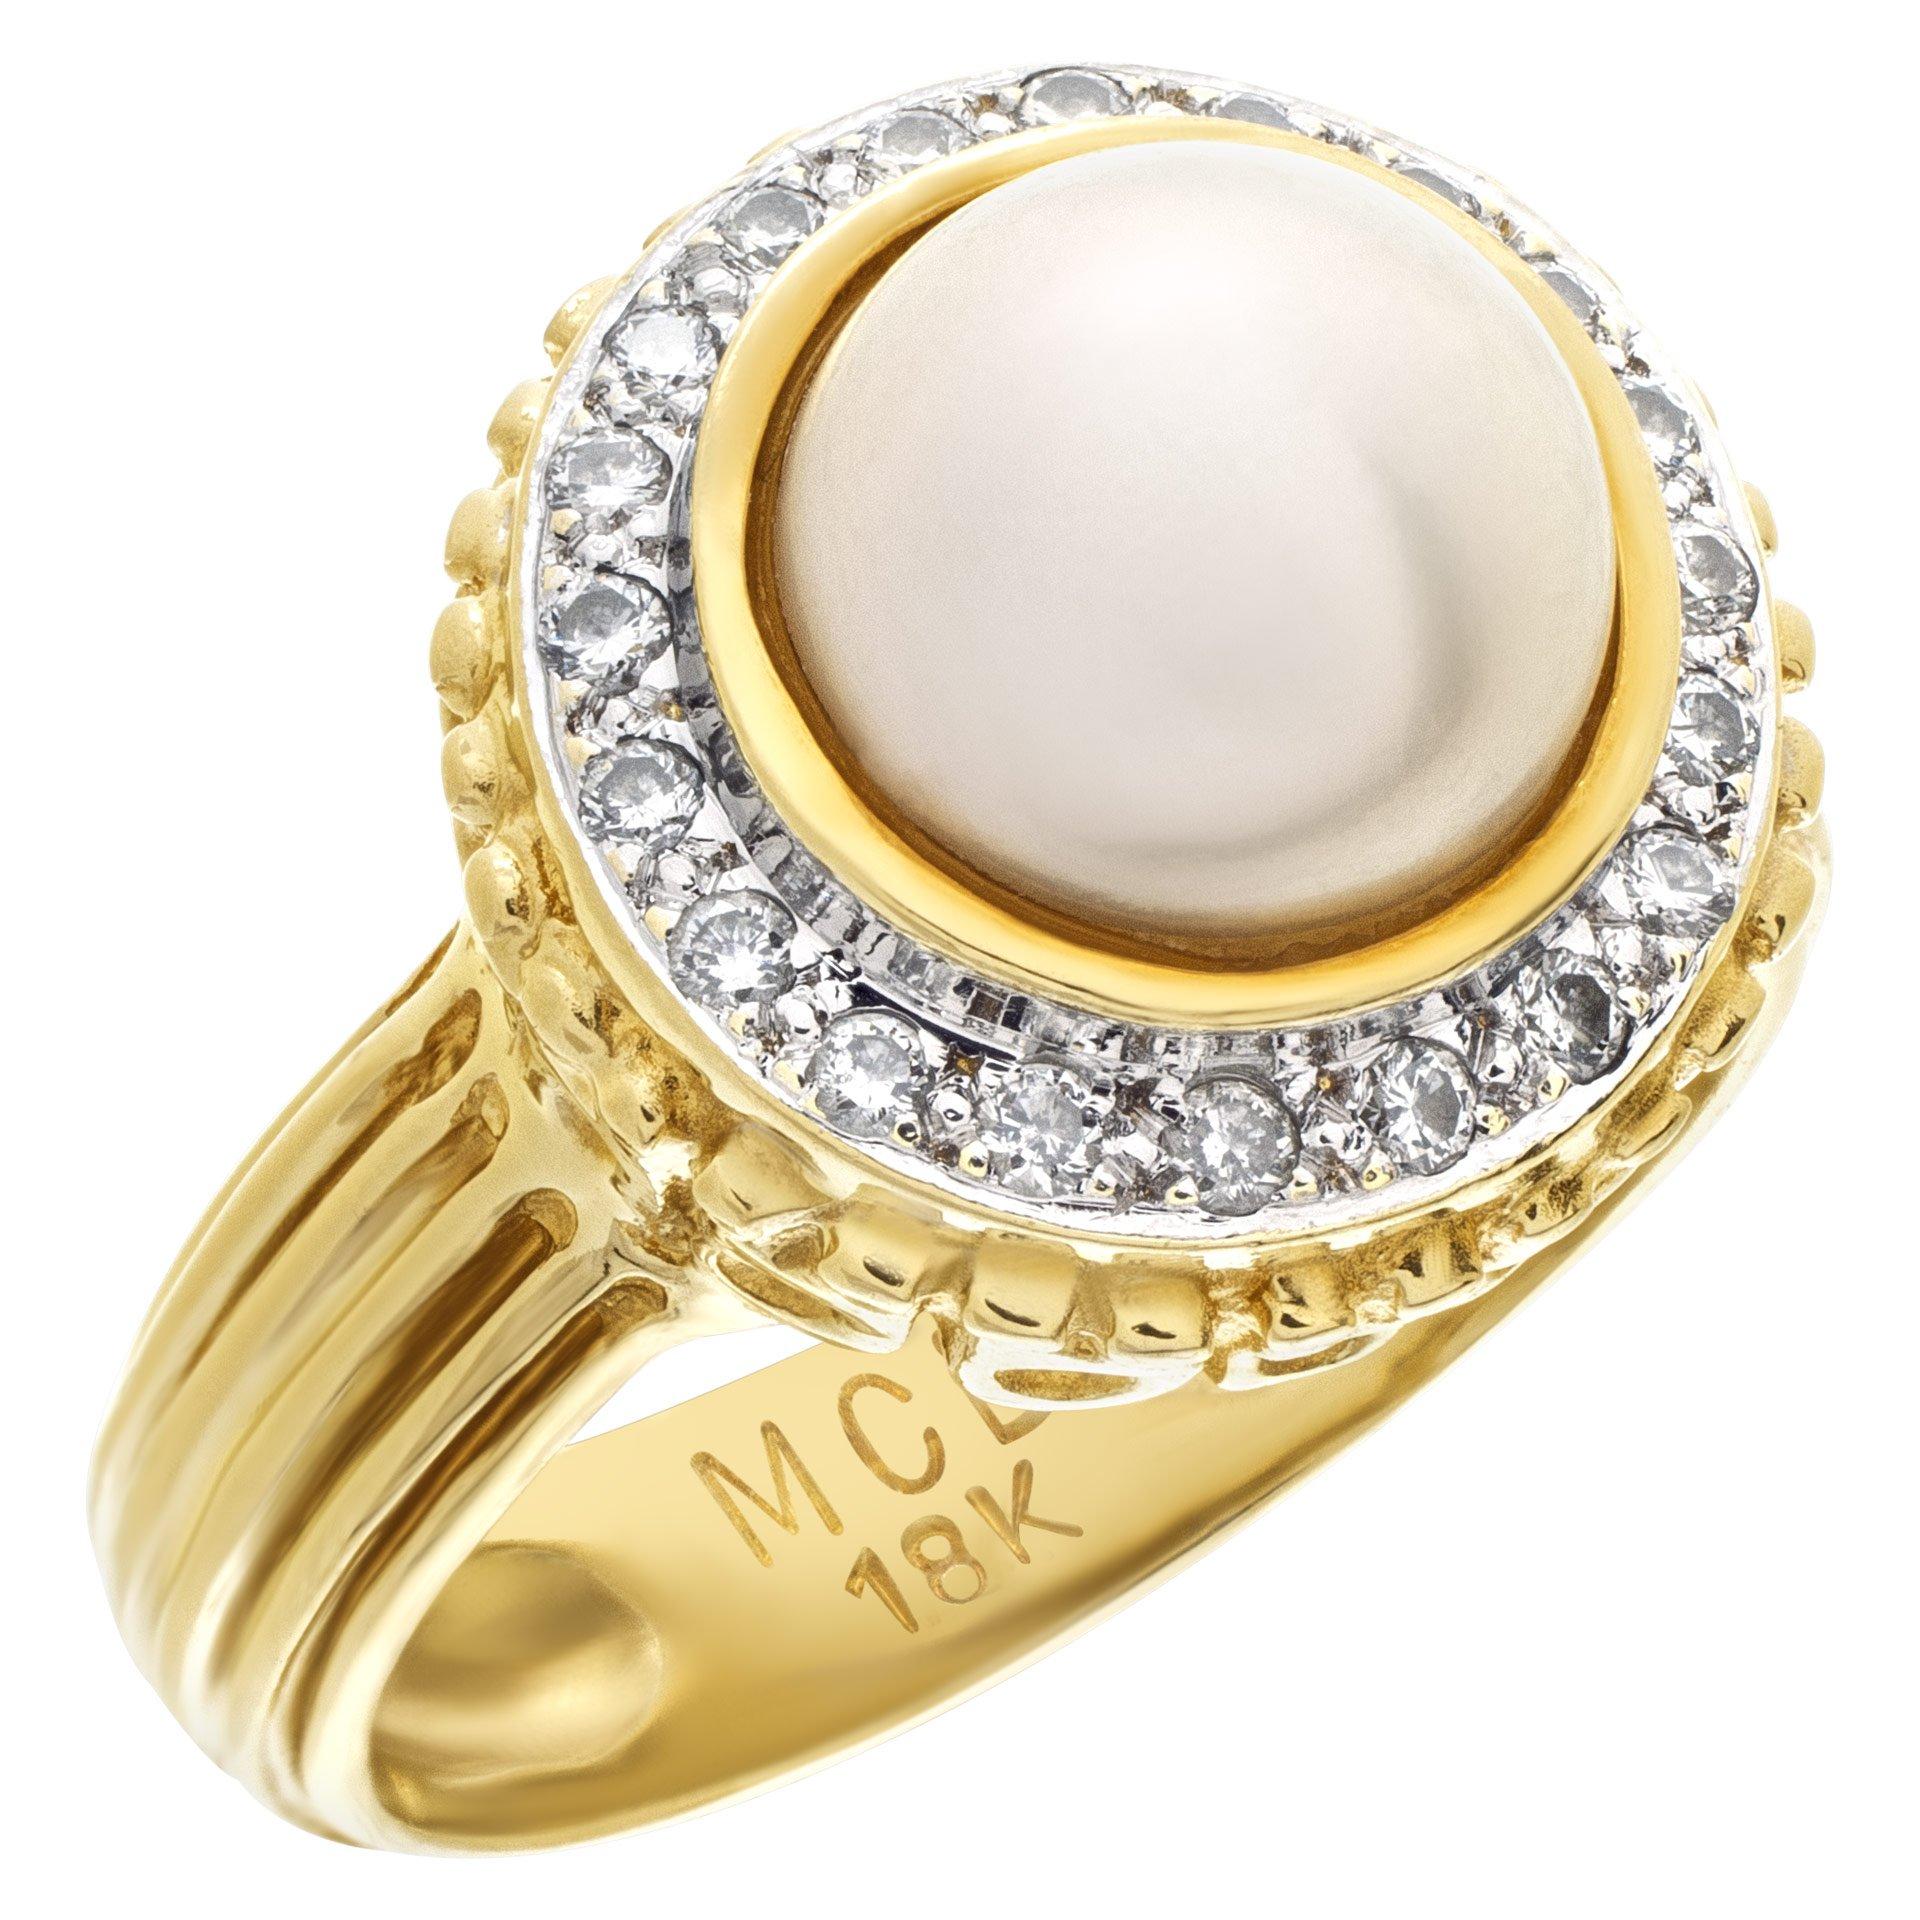 Pretty golden overtone 8.2mm pearl ring in 18k yellow gold with diamond halo, approxiamtely 0.40 carats in diamonds. Size 6.5.

This Pearl/diamond ring is currently size 6.5 and some items can be sized up or down, please ask! It weighs 6.9